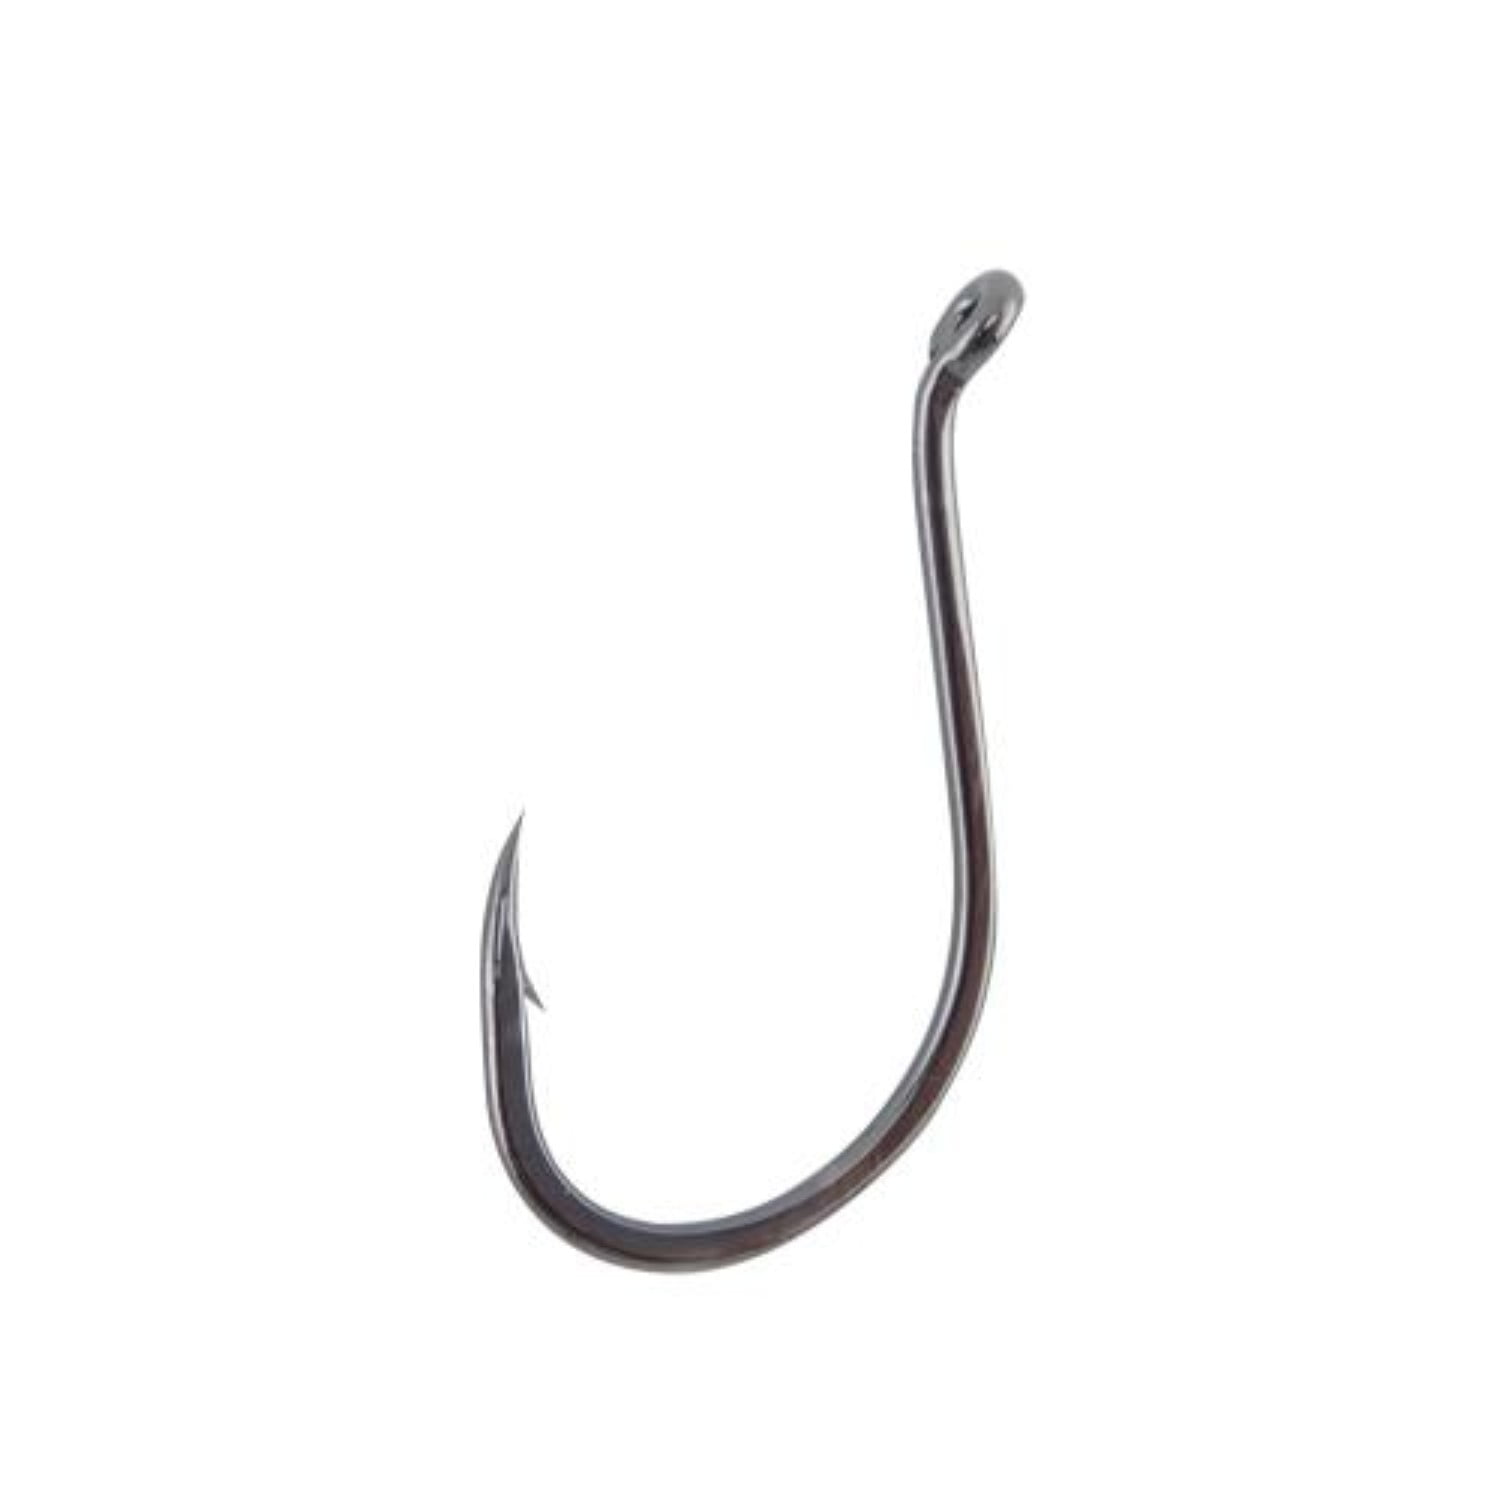 100 Red Treble Hooks 2X strong size 2 